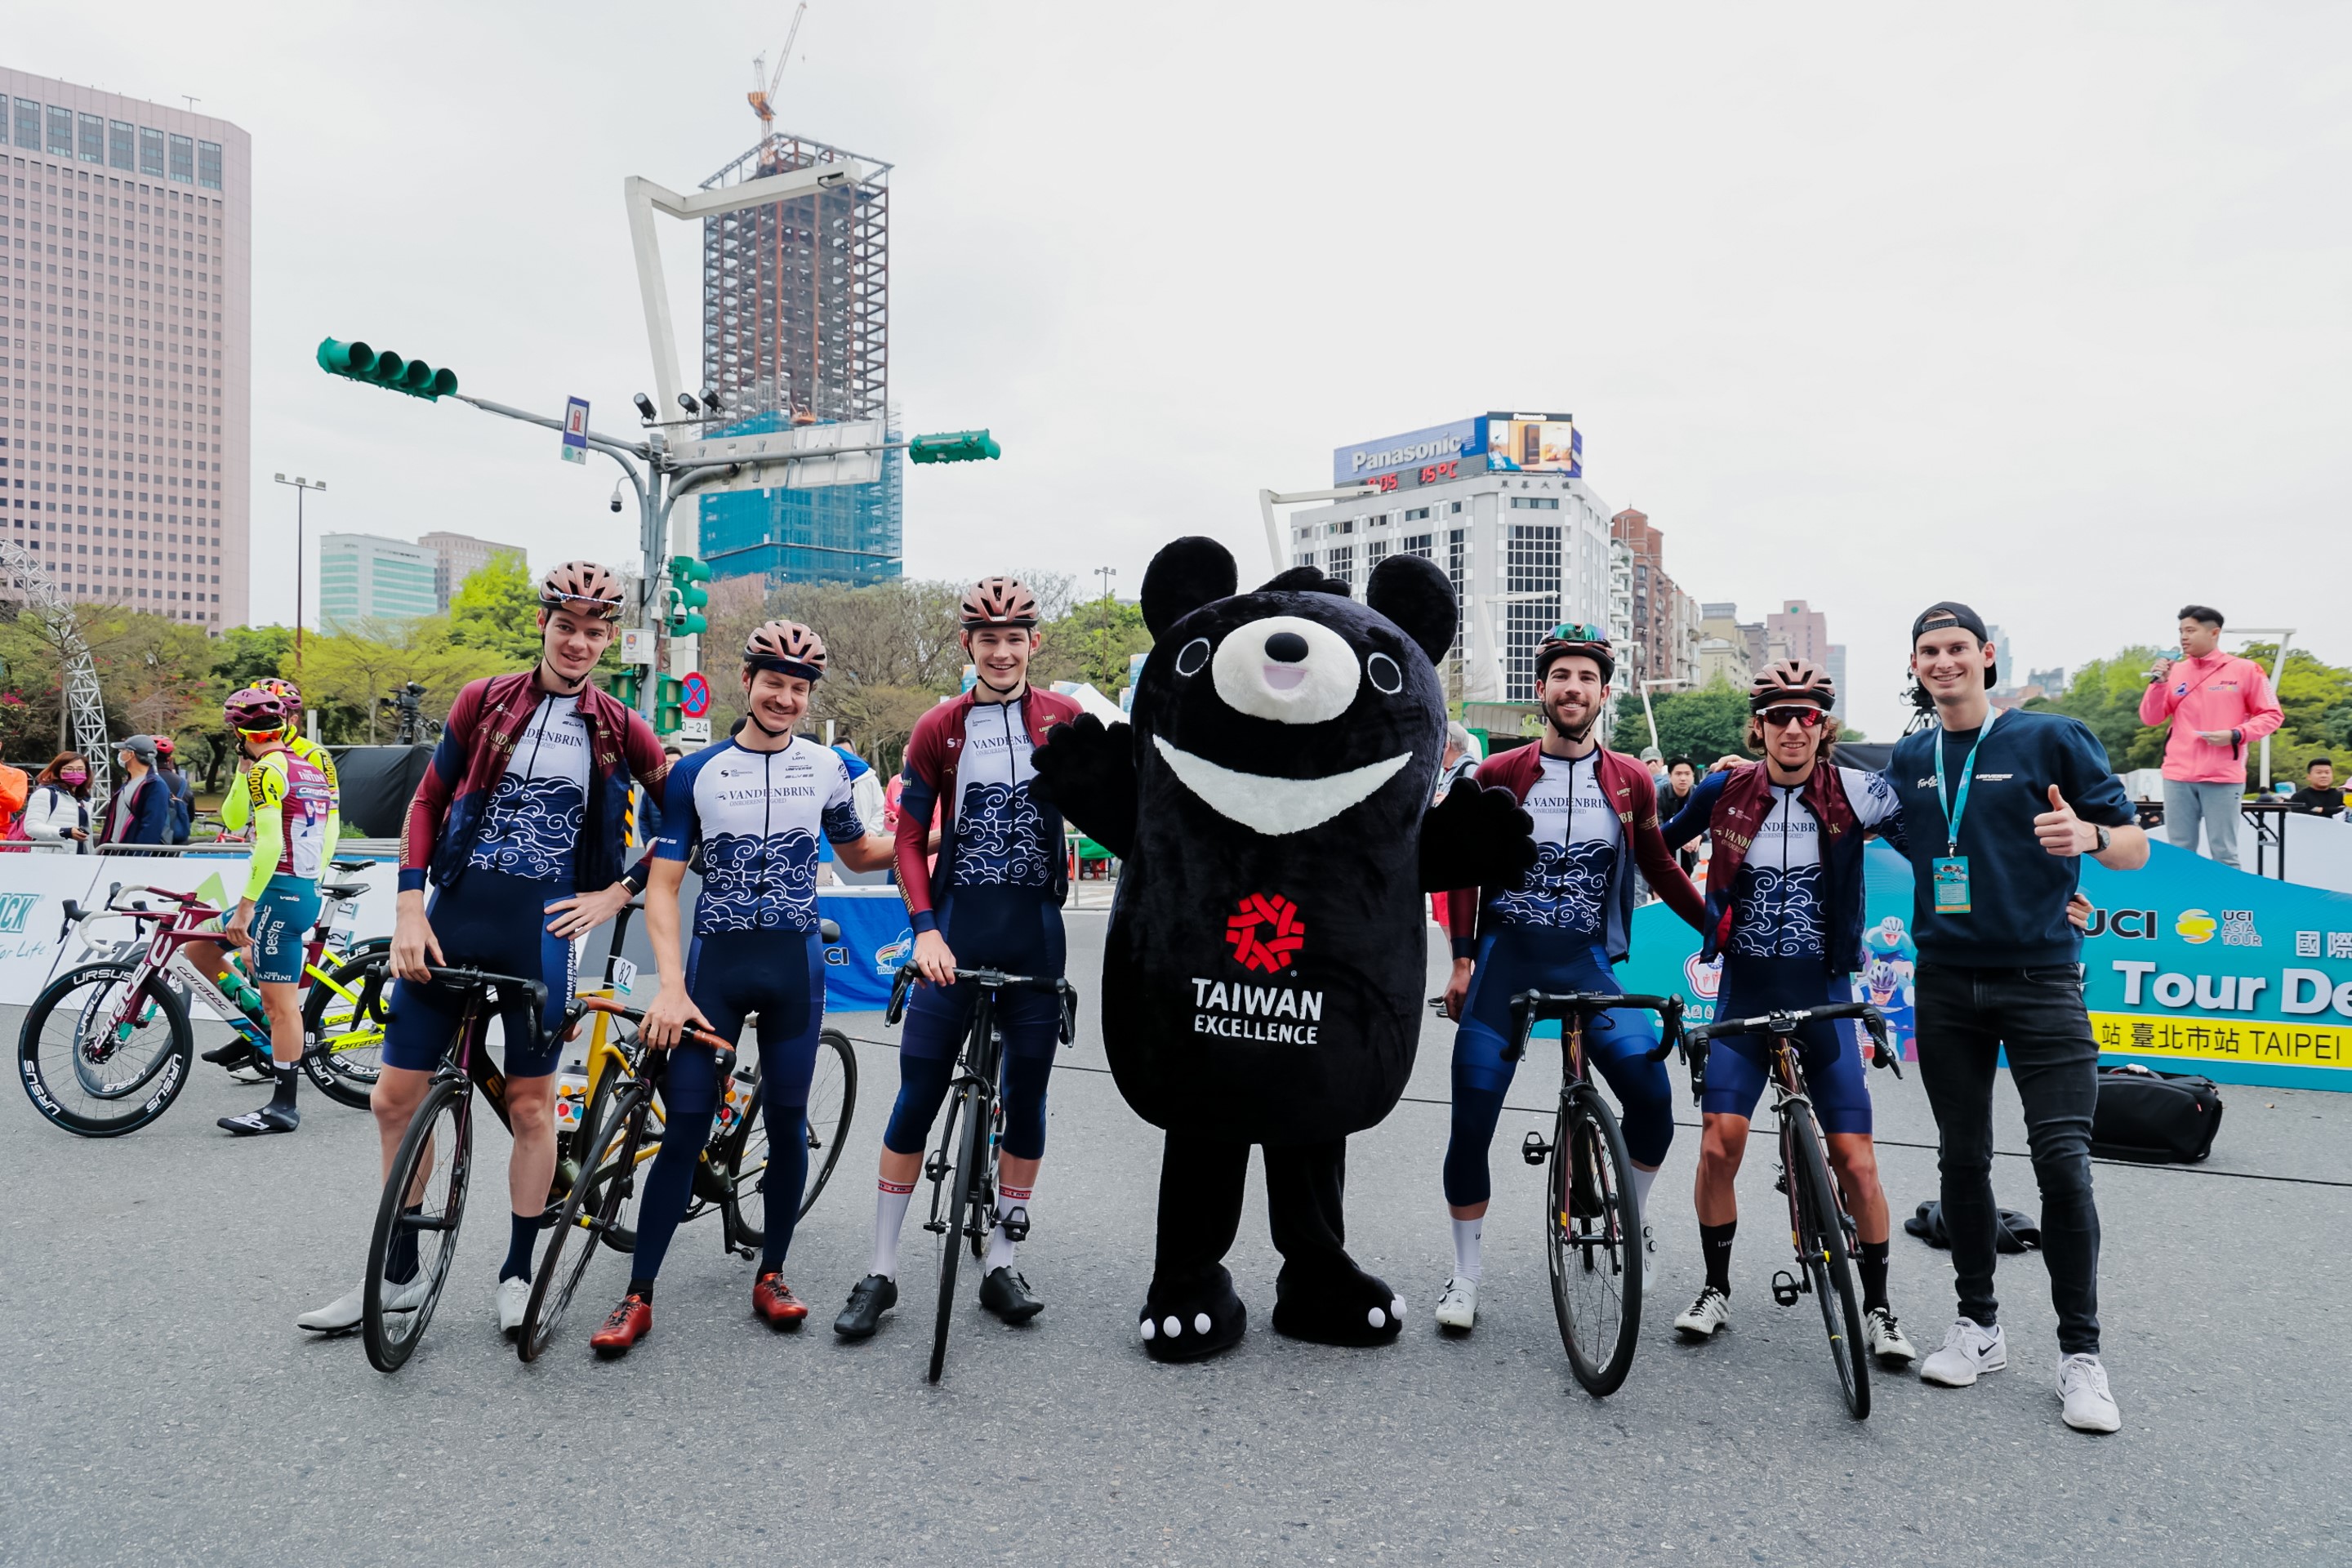 Taiwan Excellence Sponsored the Tour de Taiwan to Boost Taiwan